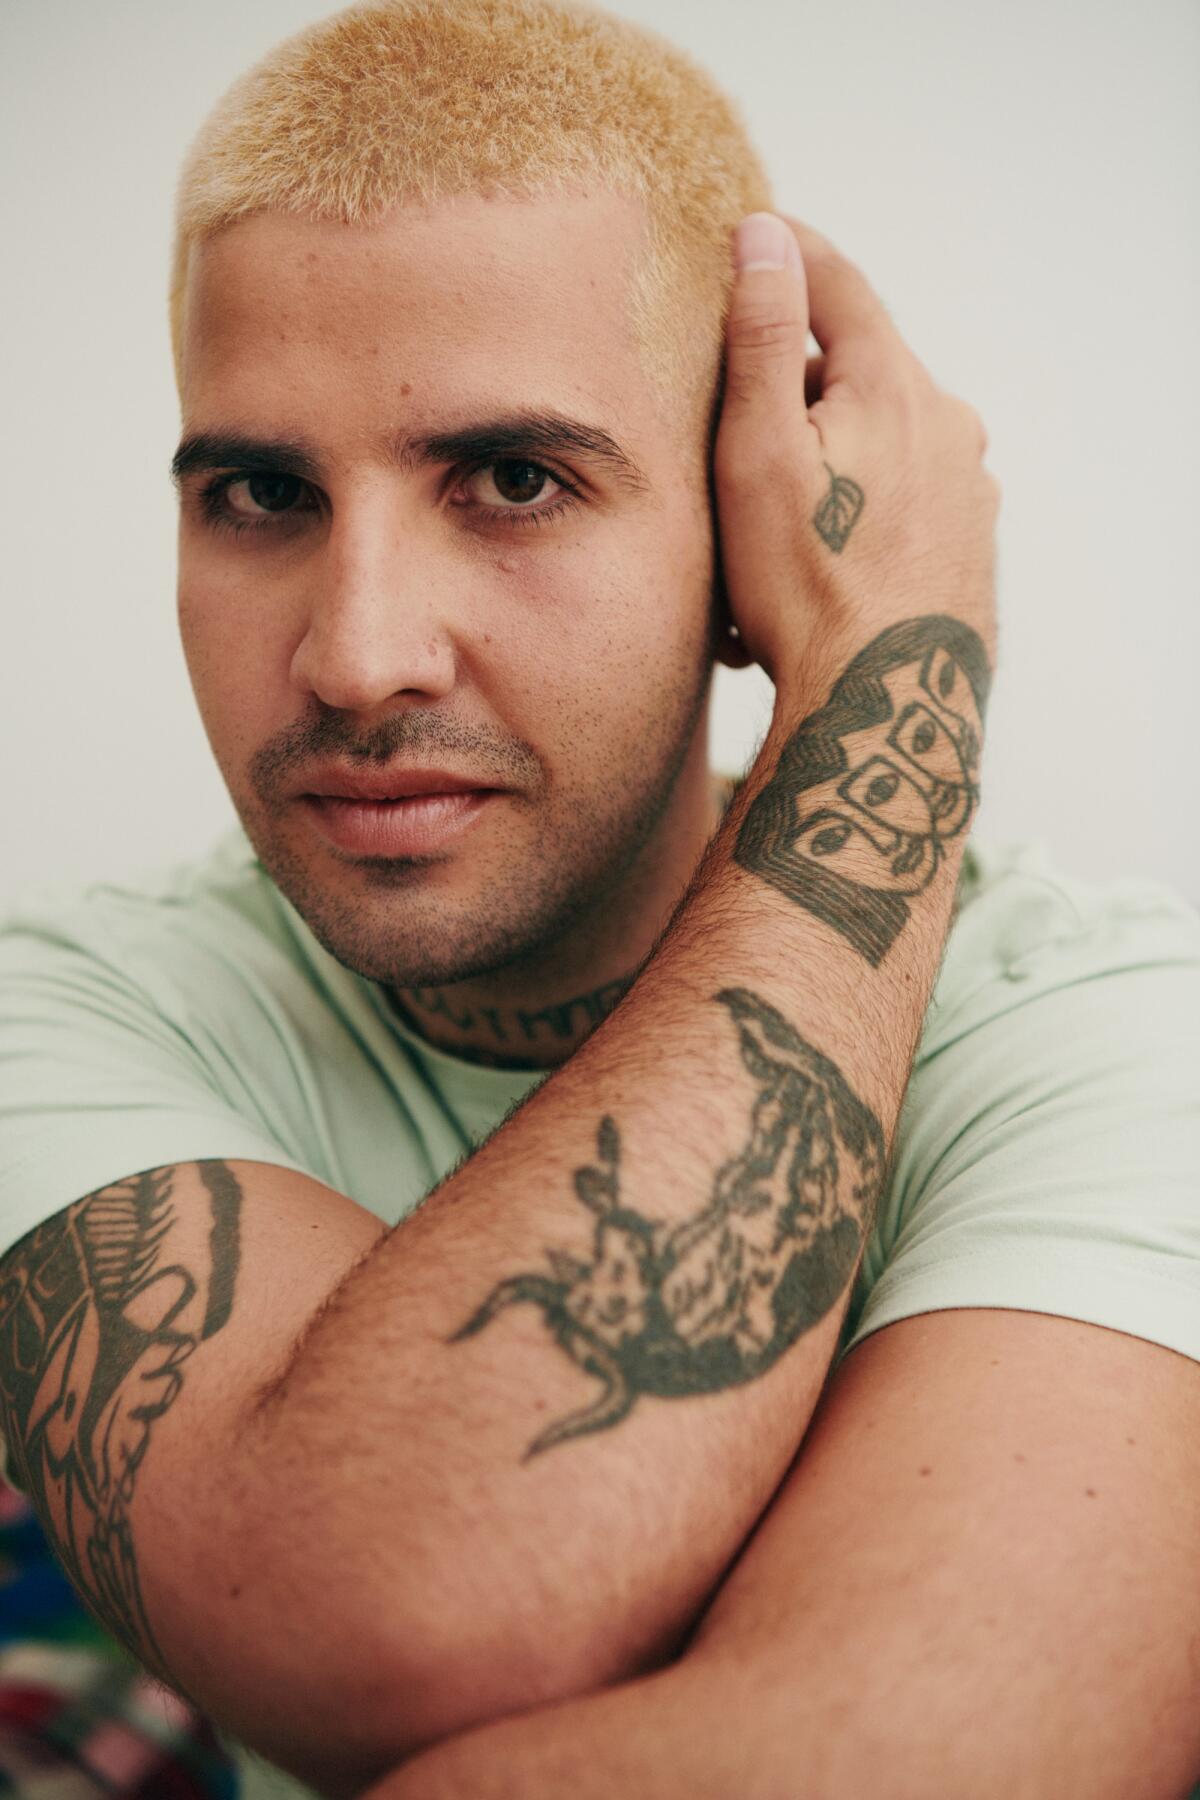 A person with close-cropped fair hair touches the left side of their head with their tattooed right arm.